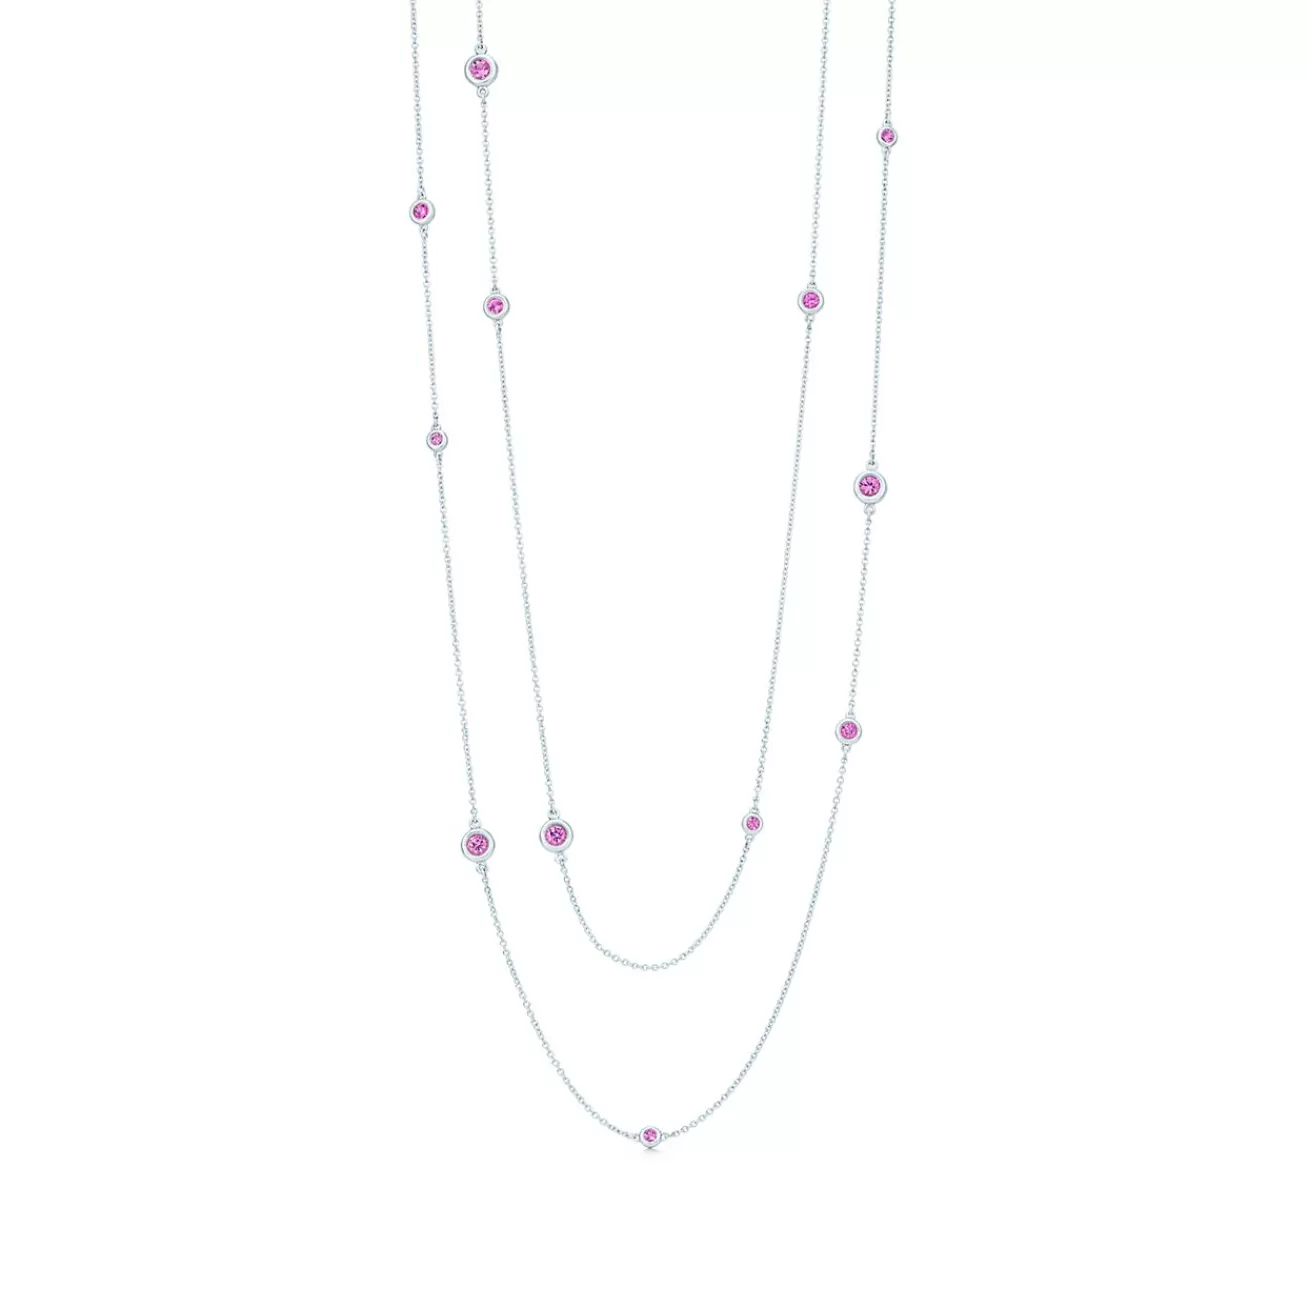 Tiffany & Co. Elsa Peretti® Color by the Yard necklace in silver with pink sapphires. | ^ Necklaces & Pendants | Sterling Silver Jewelry